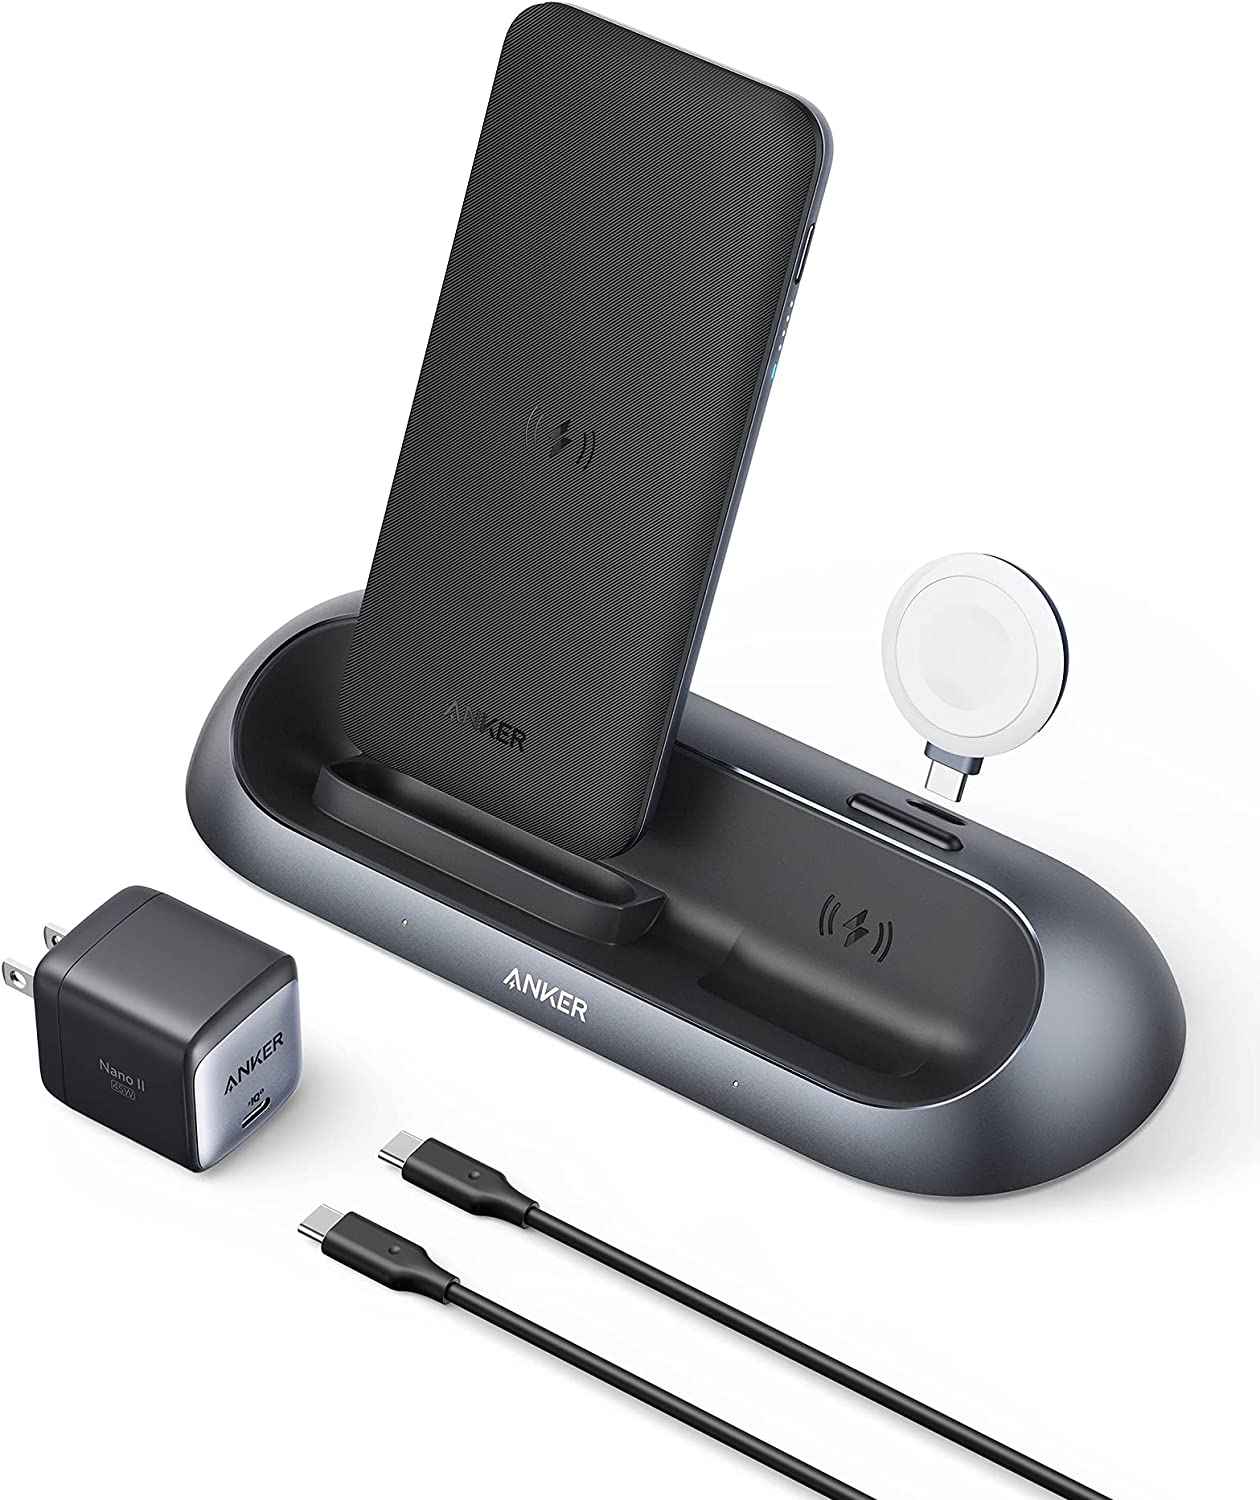 The Anker PowerWave 3-in-1 charging stand lets you take power on the go.